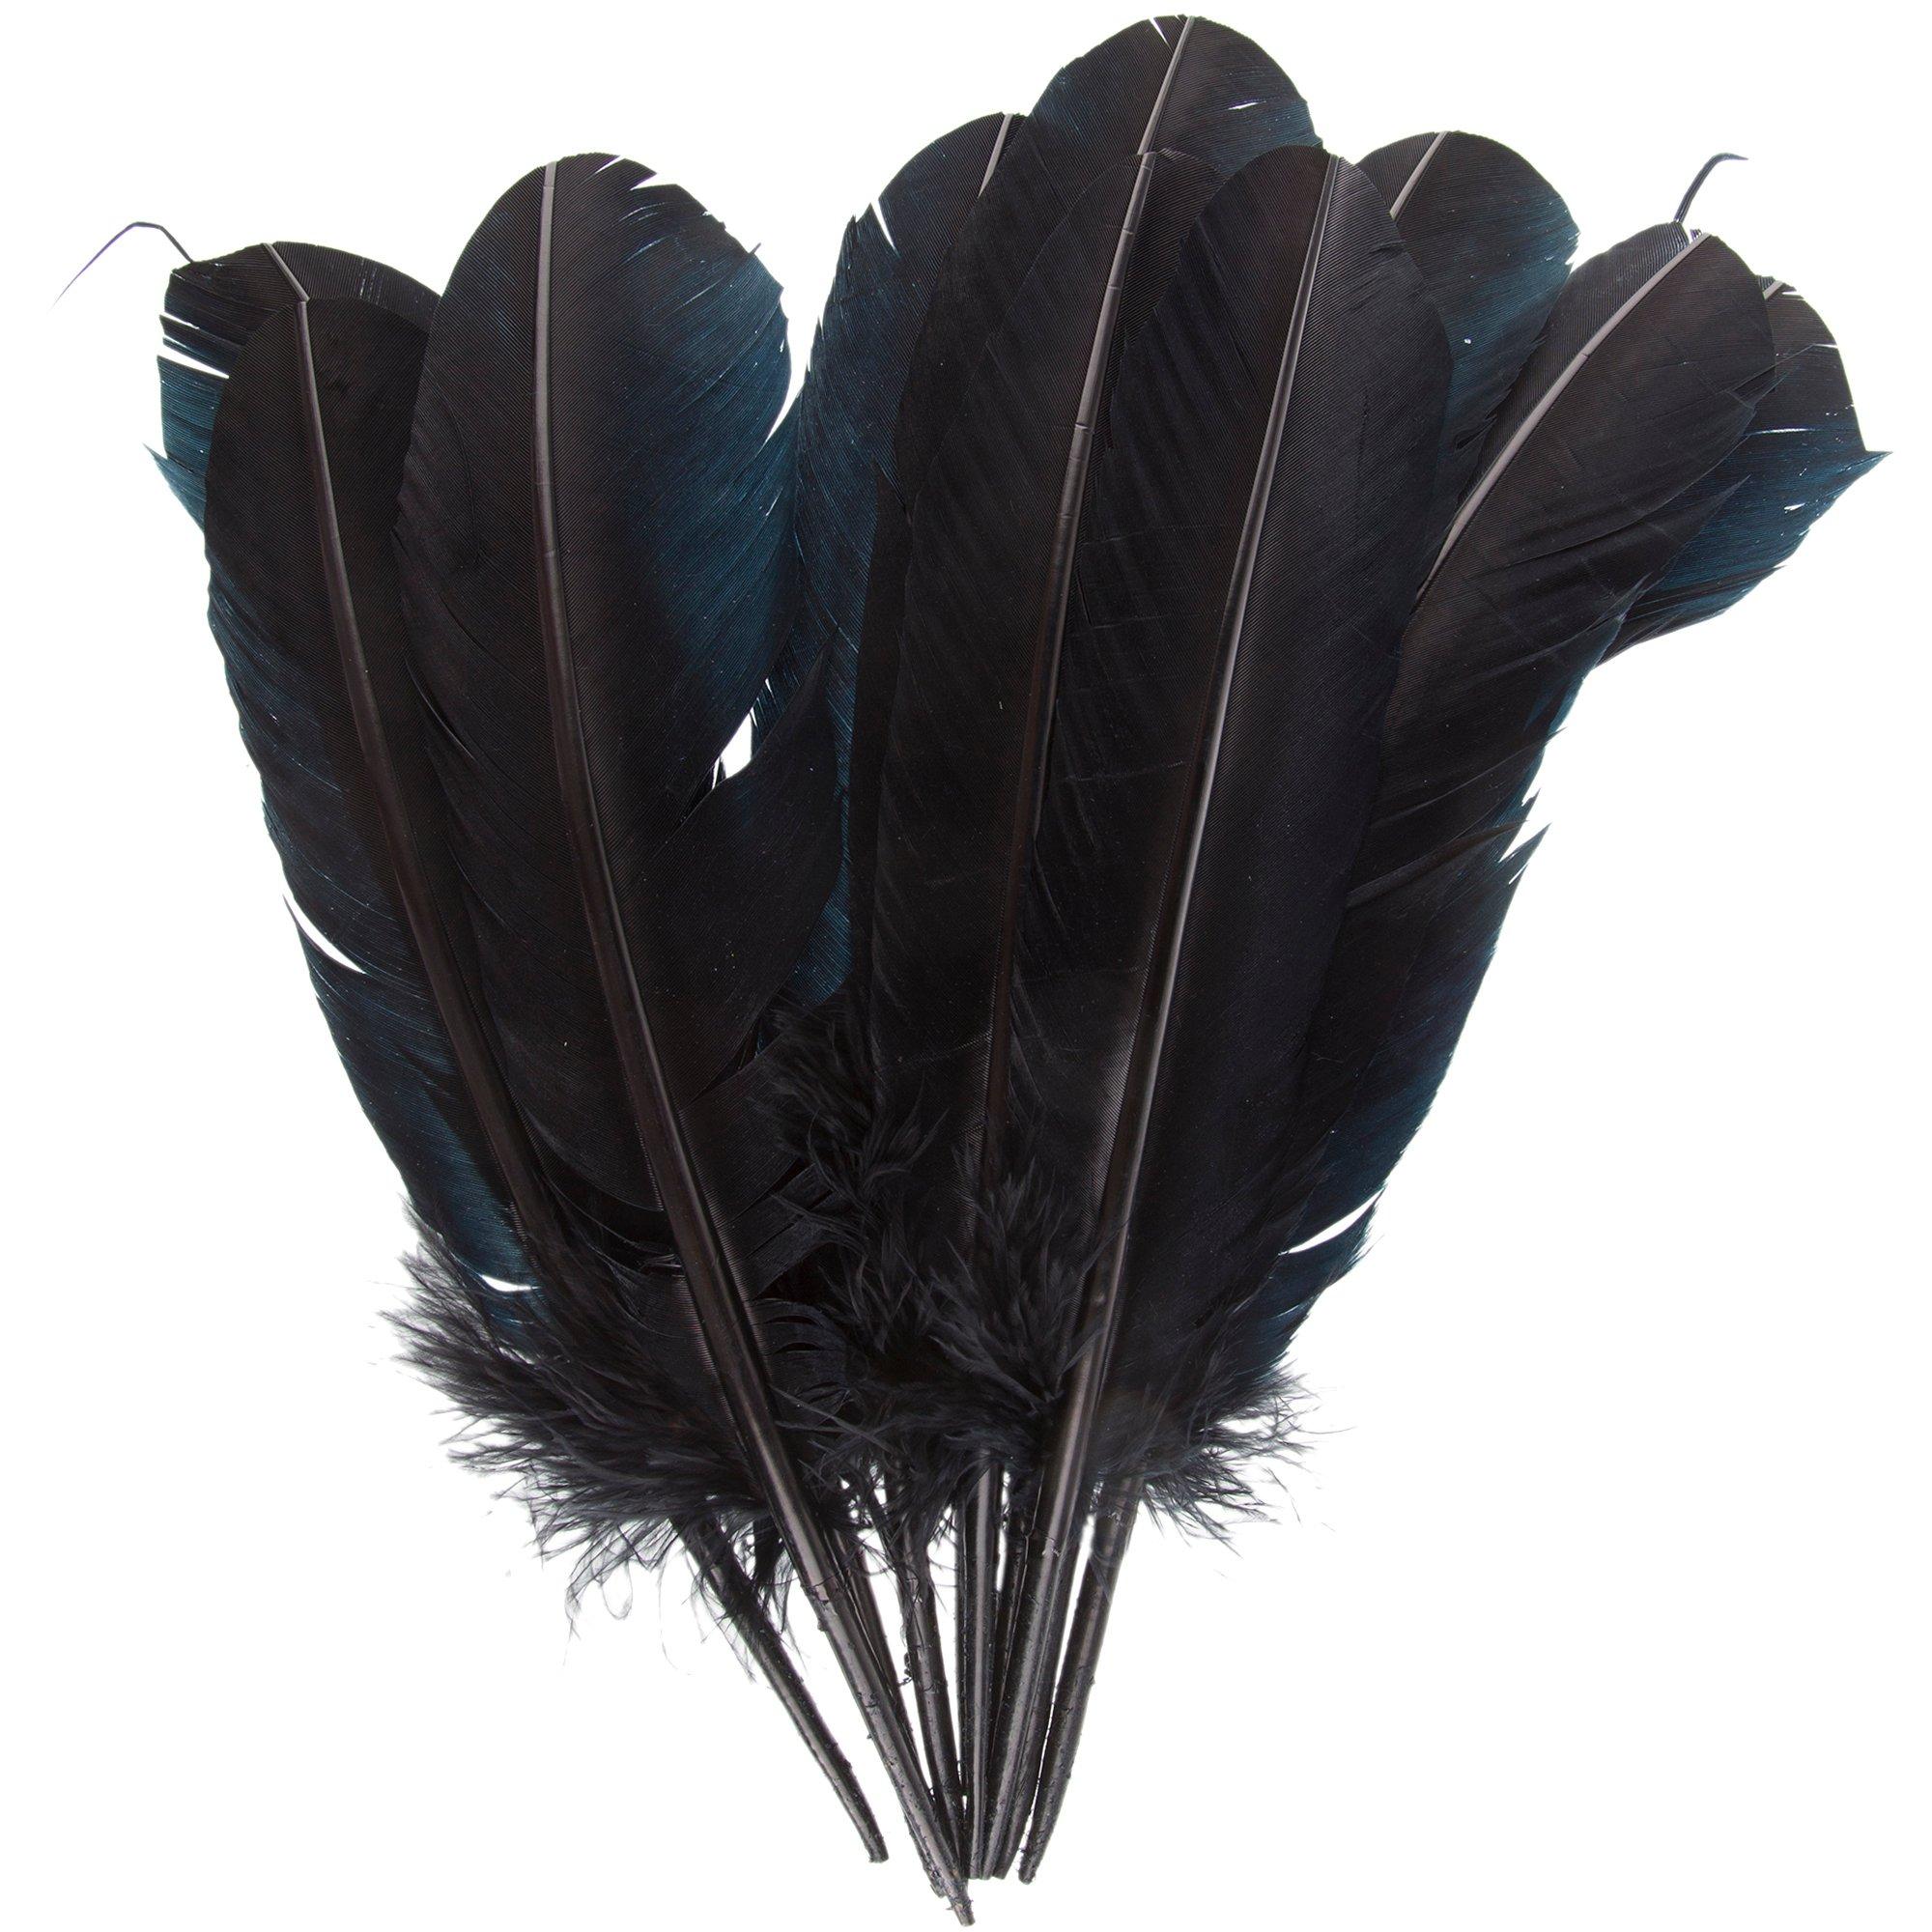 Goose Pointer Feathers for Quills – ArteOfTheBooke